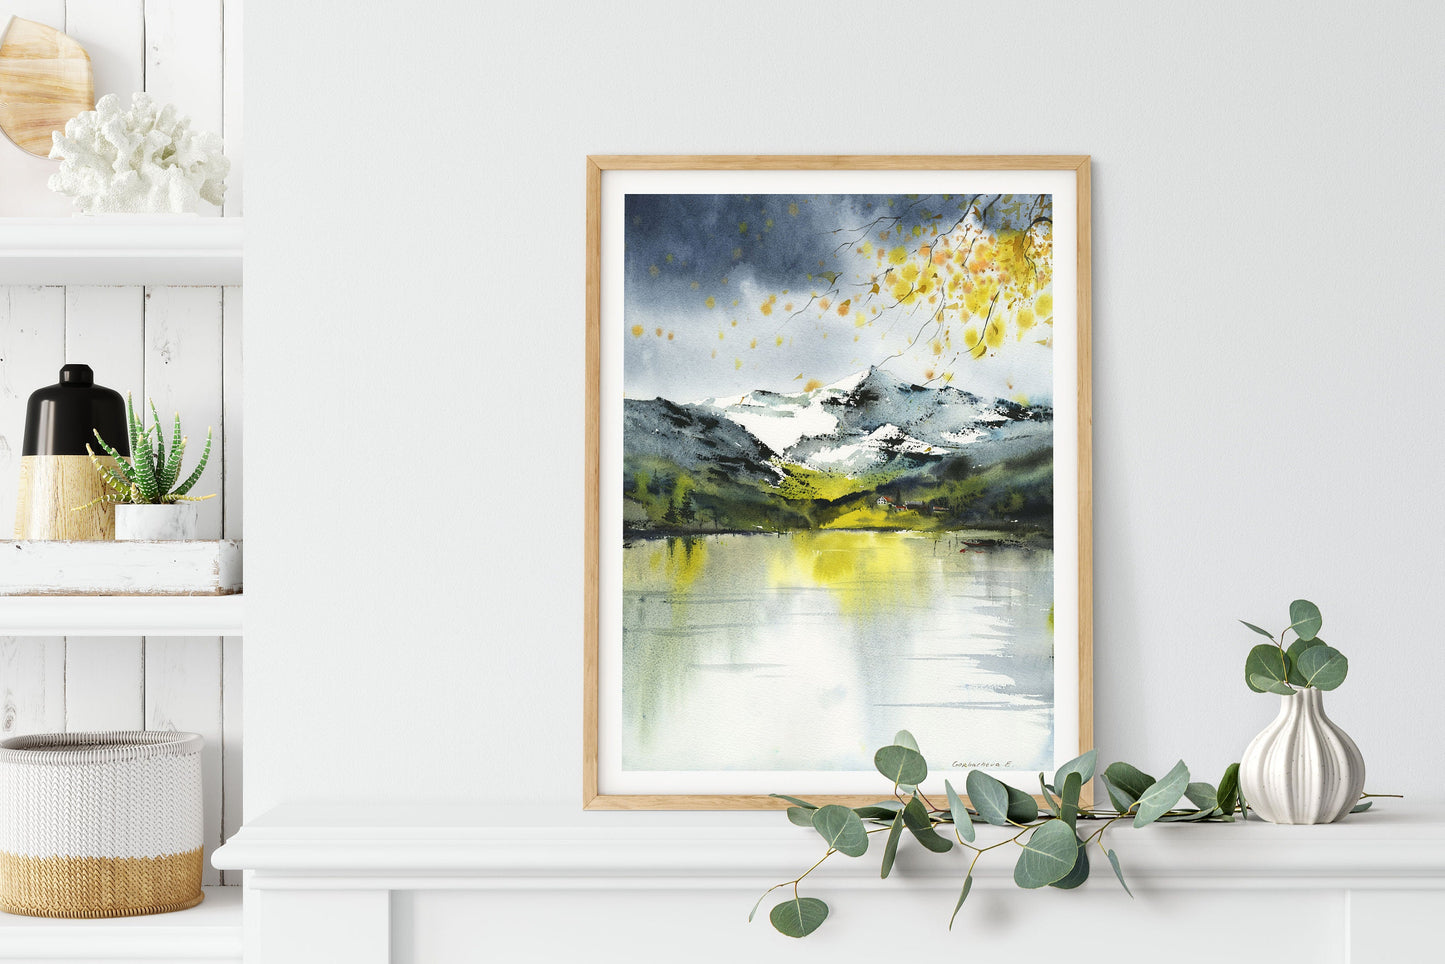 Fall Trees Print, Watercolor Mountain Art, Lake House Decor, Nature Wall Decoration, Autumn Forest, Aspens, Green